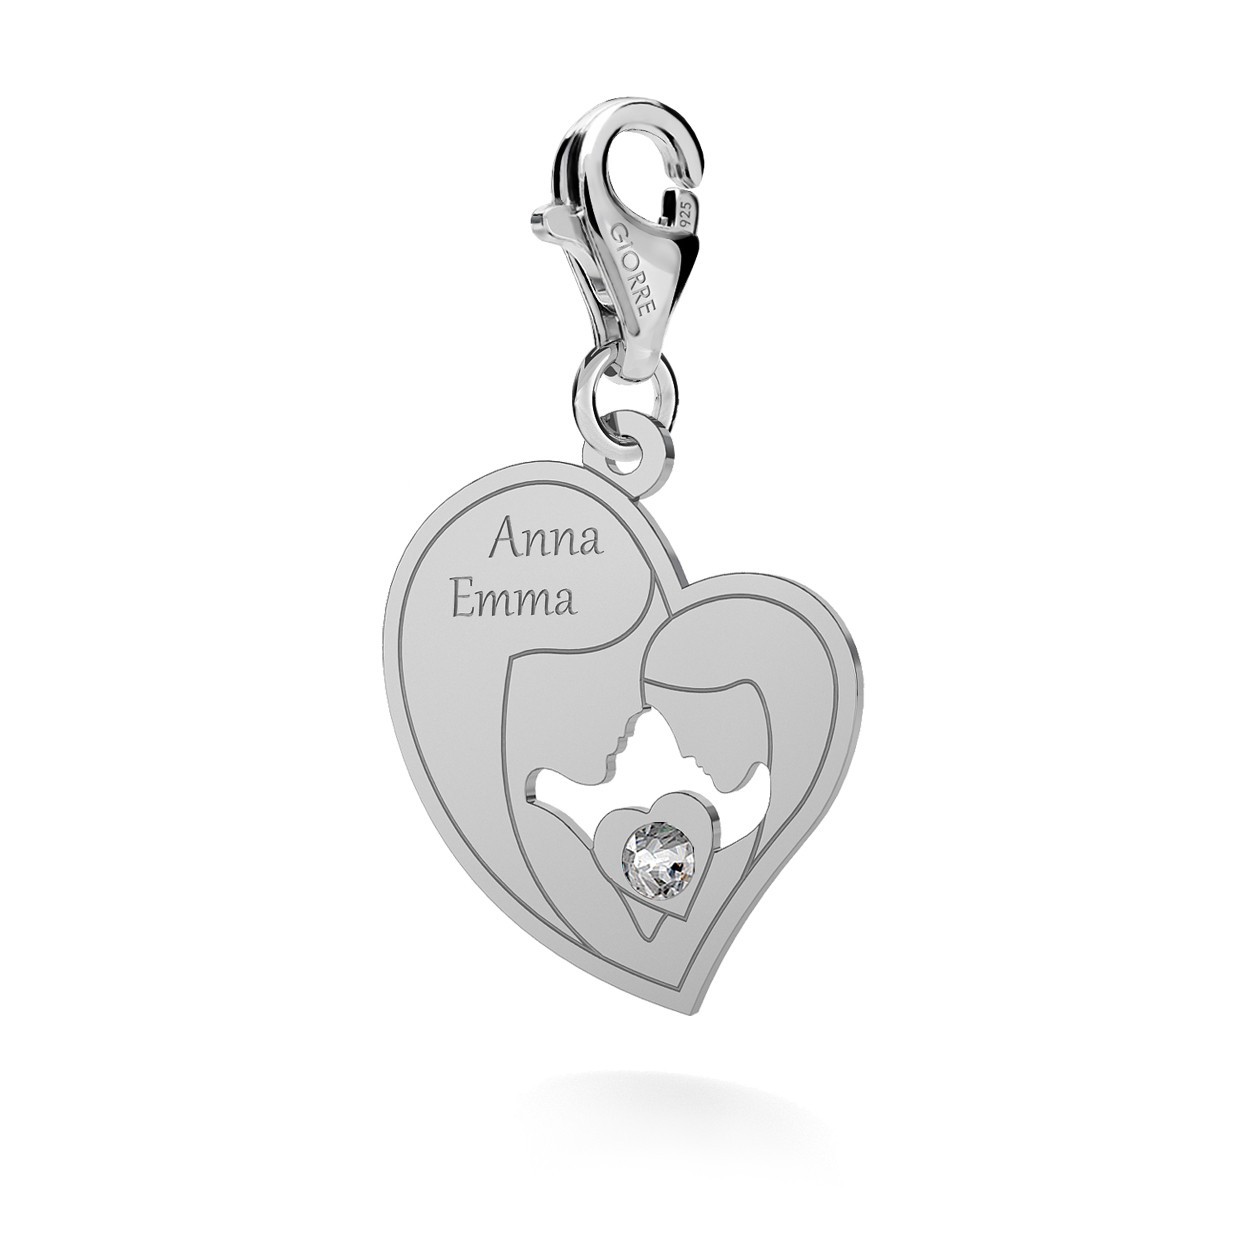 CHARM 91, MOTHER AND DOUGHTER, SWAROVSKI 2038 SS 6, STERLING SILVER (925) RHODIUM OR GOLD PLATED